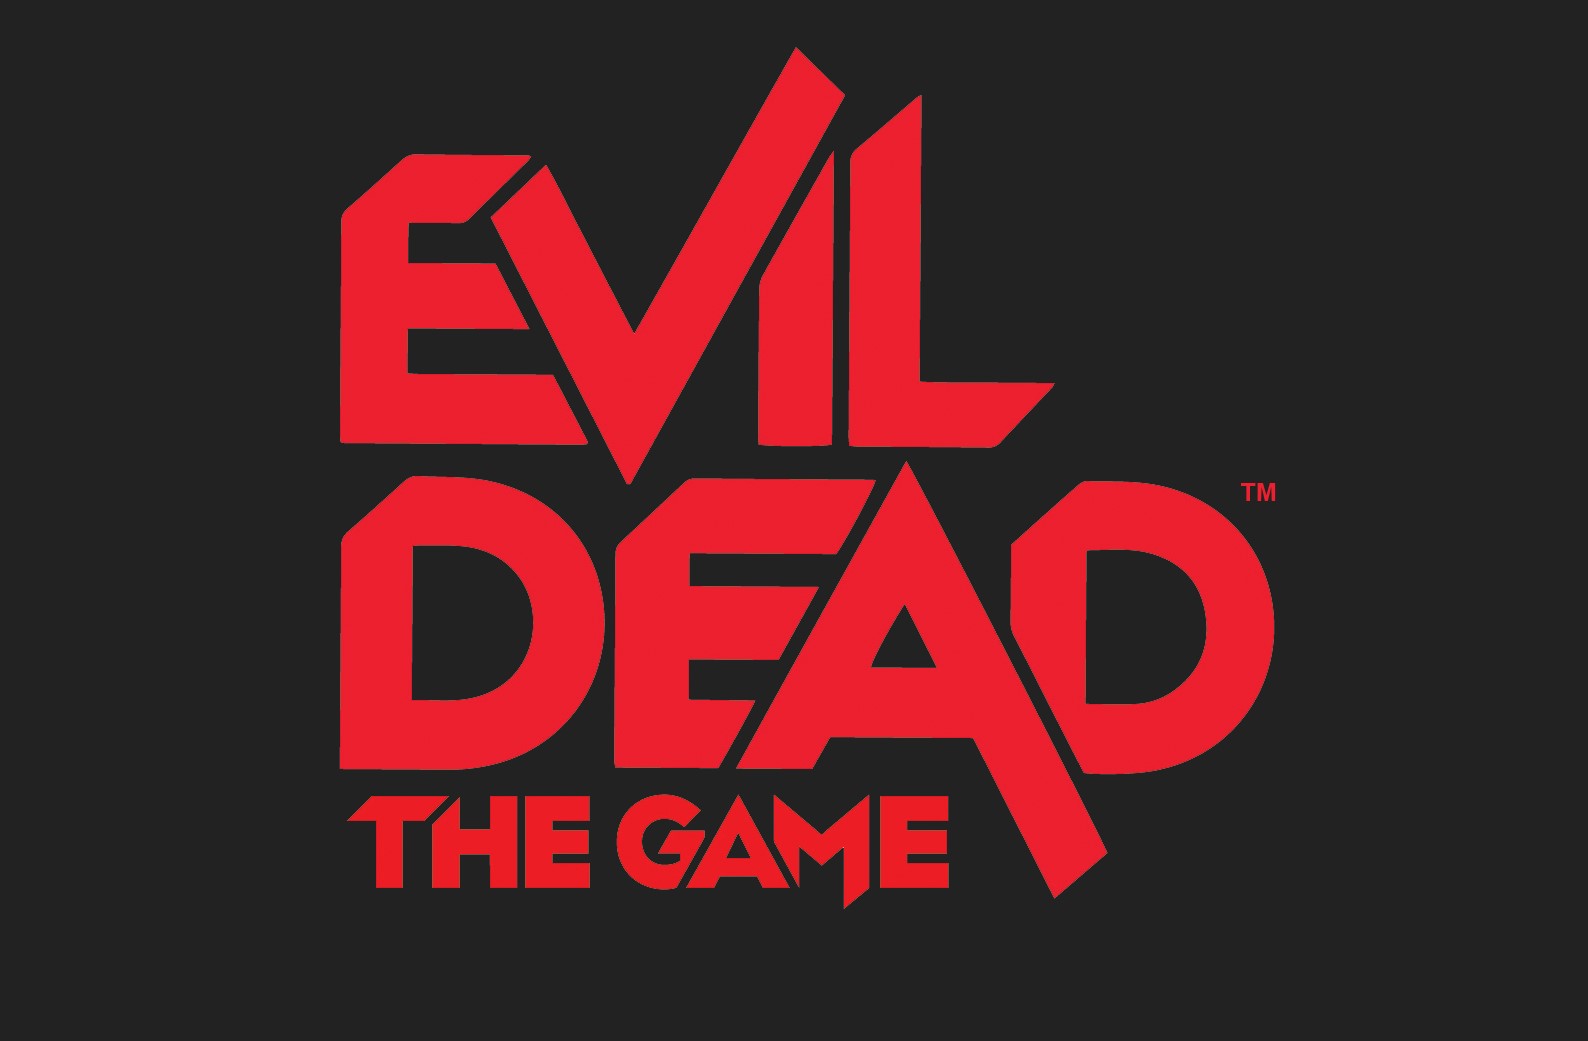 Evil Dead: The Game - Gameplay Overview Trailer